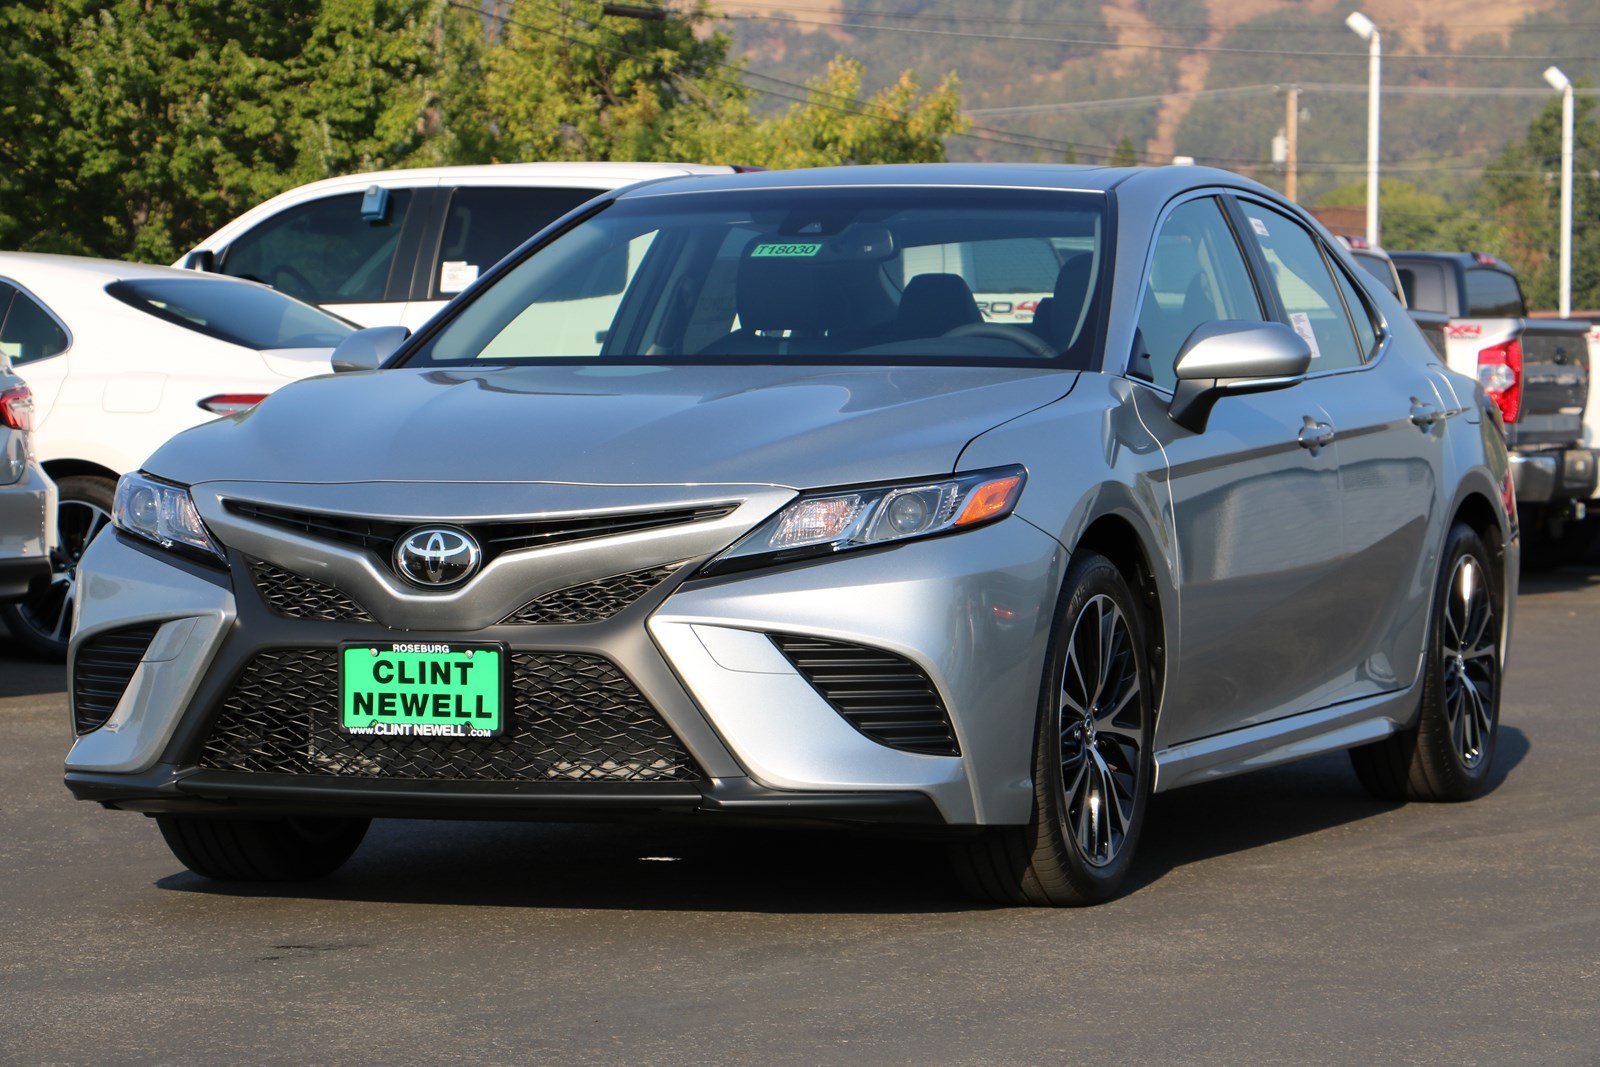 New 2018 Toyota Camry SE 4dr Car in Roseburg #T18030 | Clint Newell Toyota